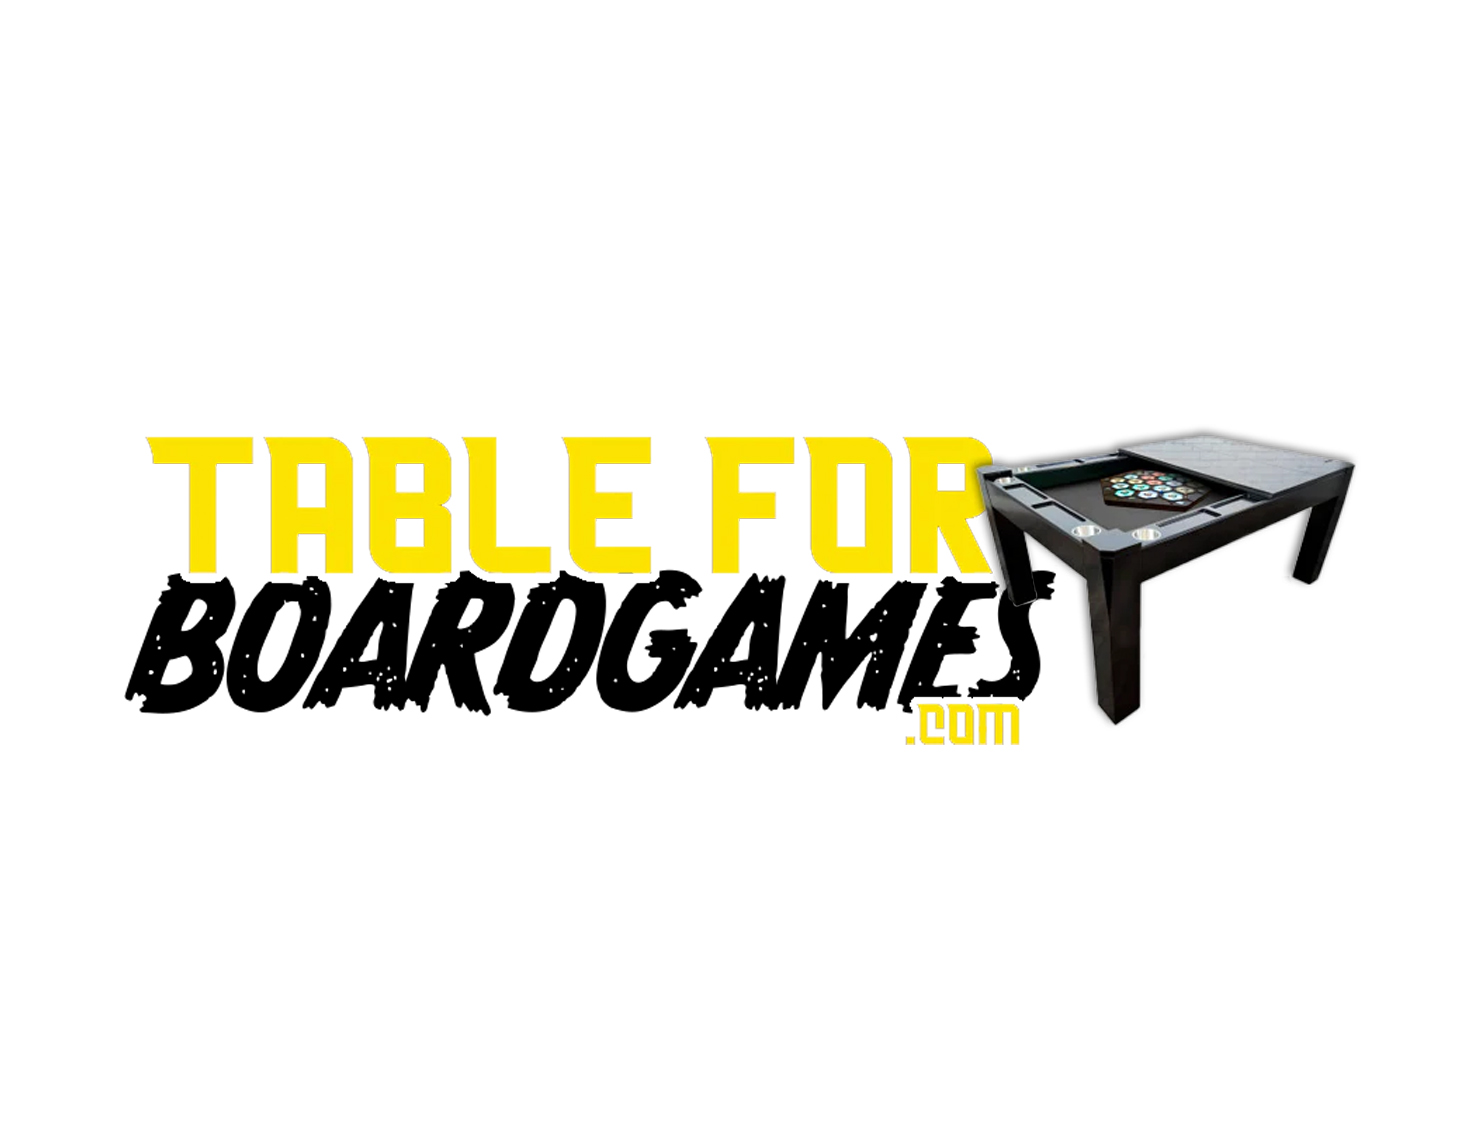 Table for Boardgames